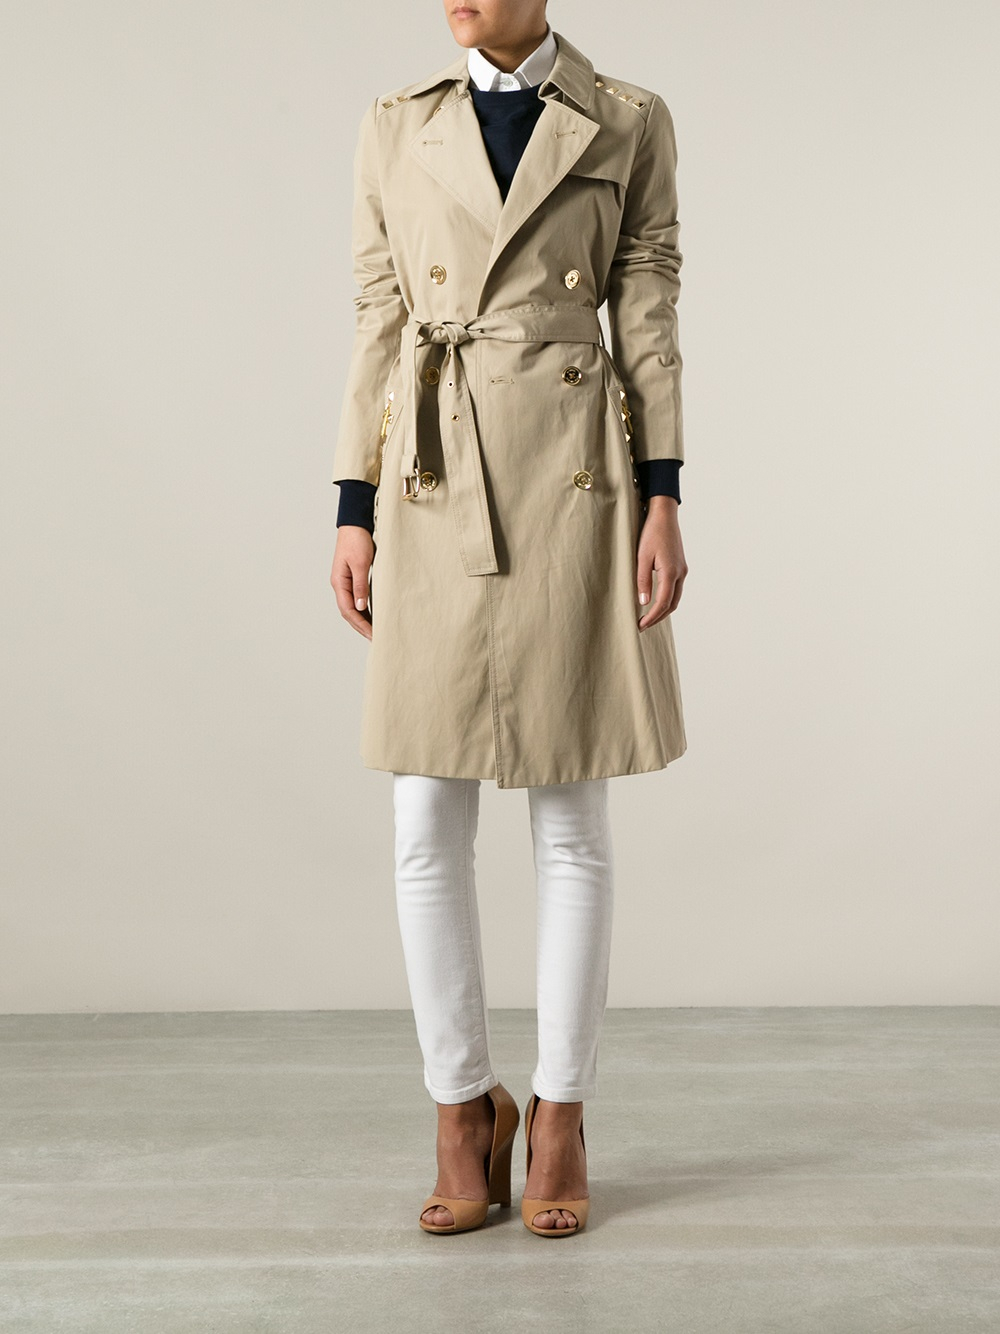 MICHAEL Michael Kors Studded Trench Coat in Natural - Lyst